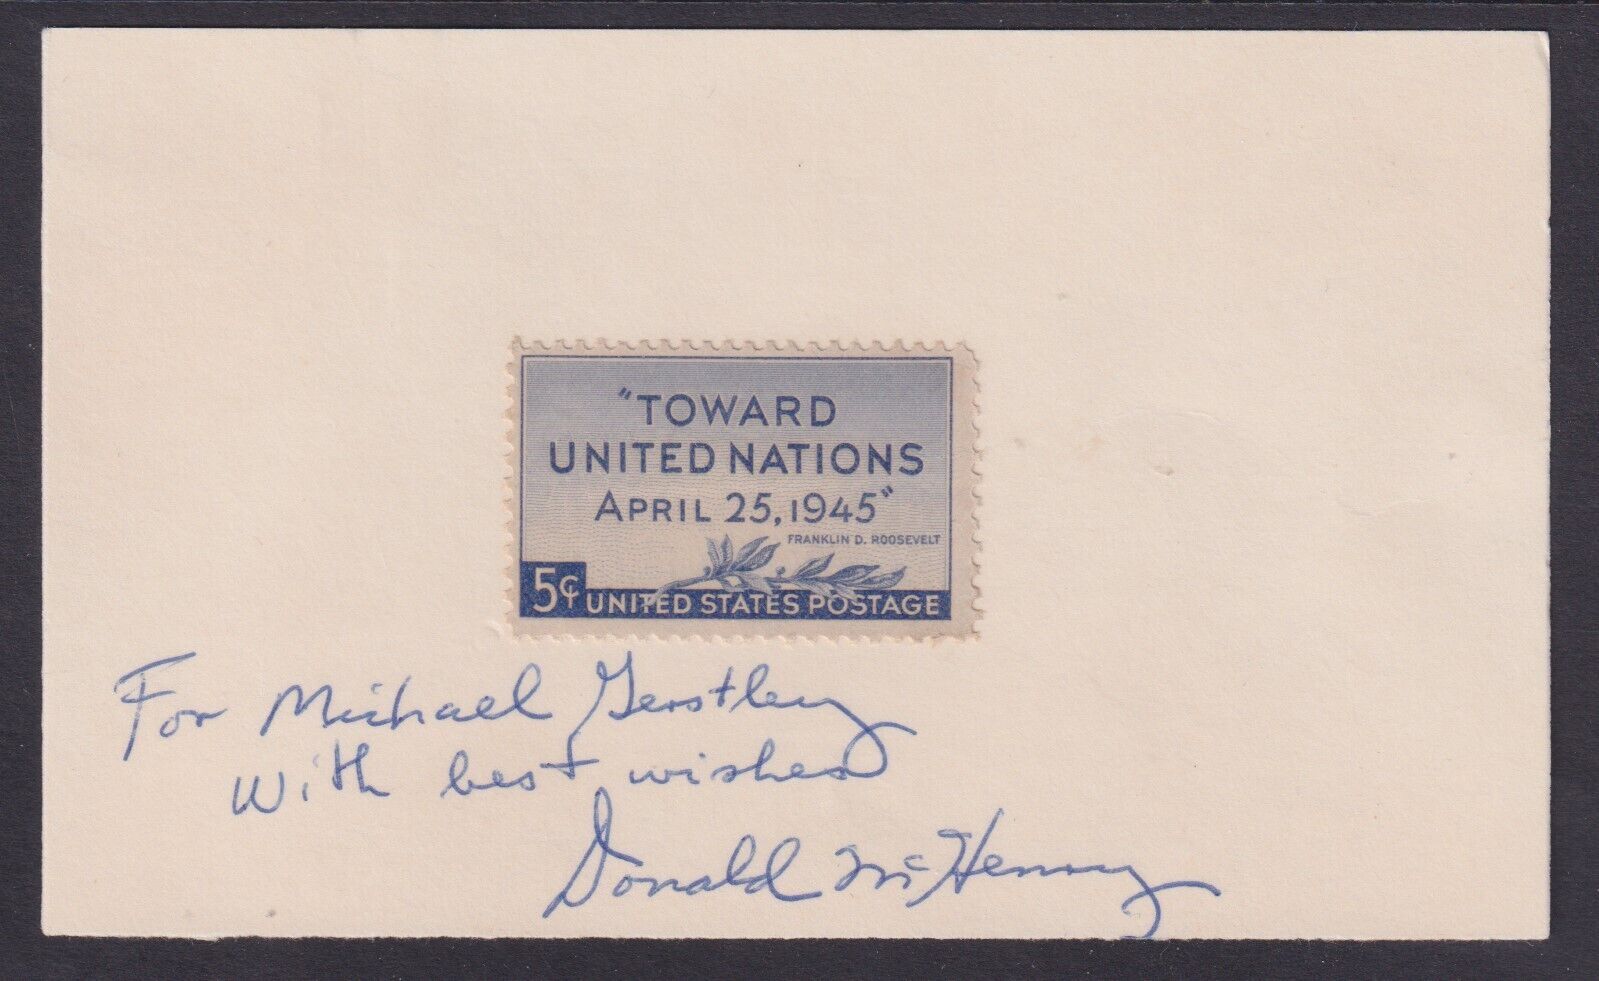 Donald McHenry (1936-), US Ambassador to UN, signed Towards United Nations stamp